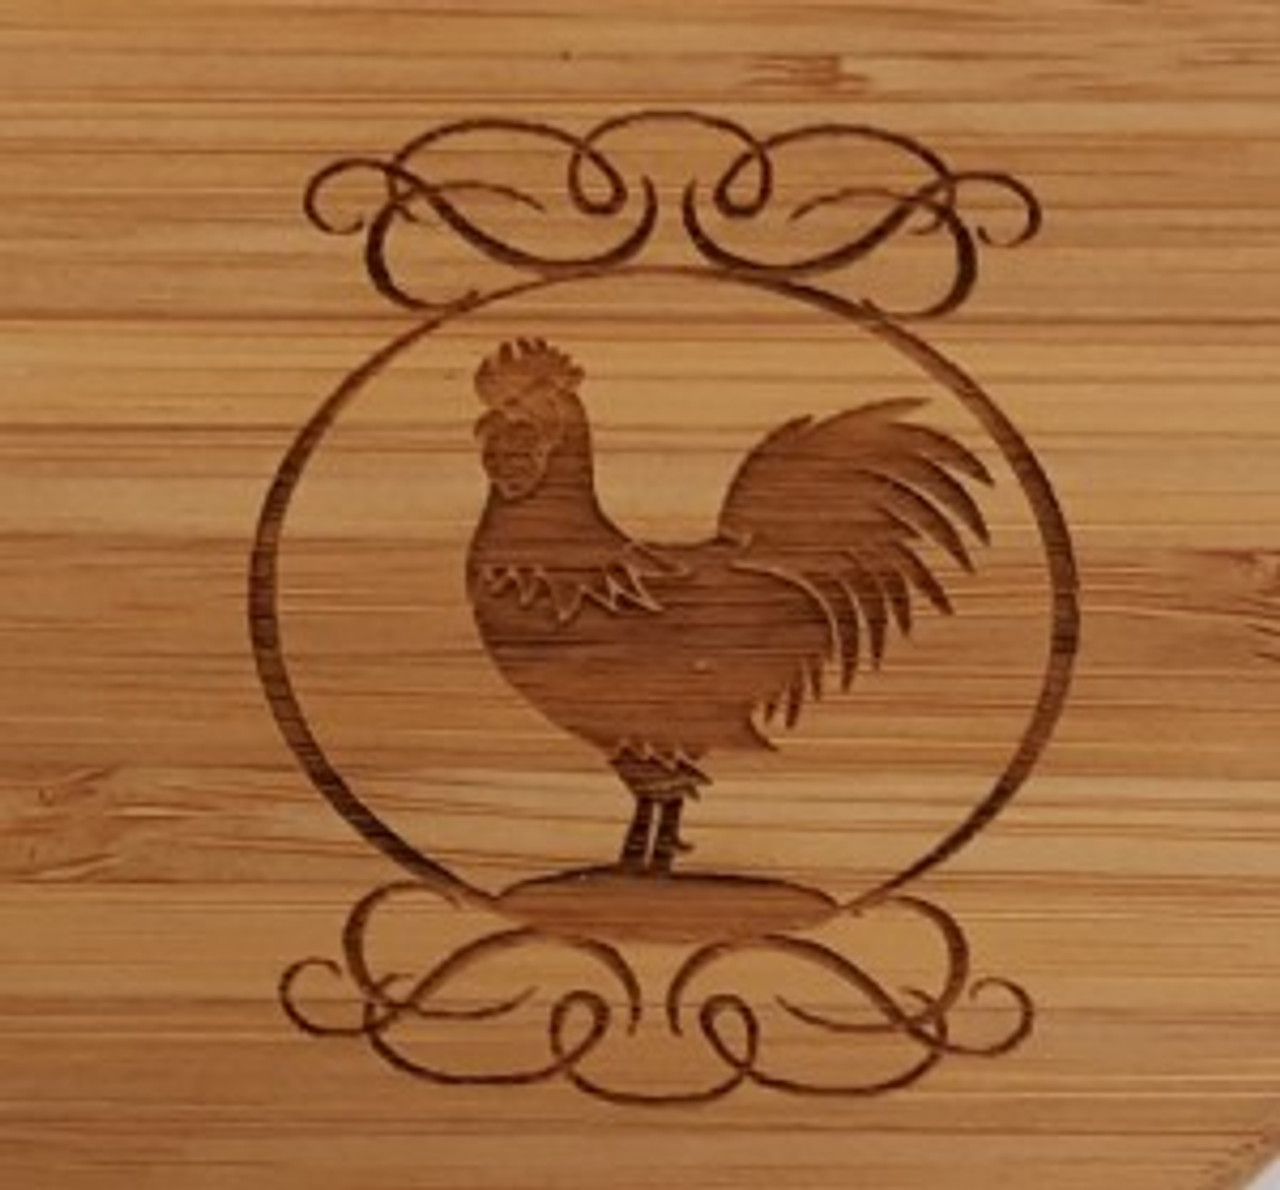 https://cdn11.bigcommerce.com/s-s8dcj5rpmy/images/stencil/1280x1280/products/2755/7049/rooster_closeup__37249.1648476261.jpg?c=2?imbypass=on